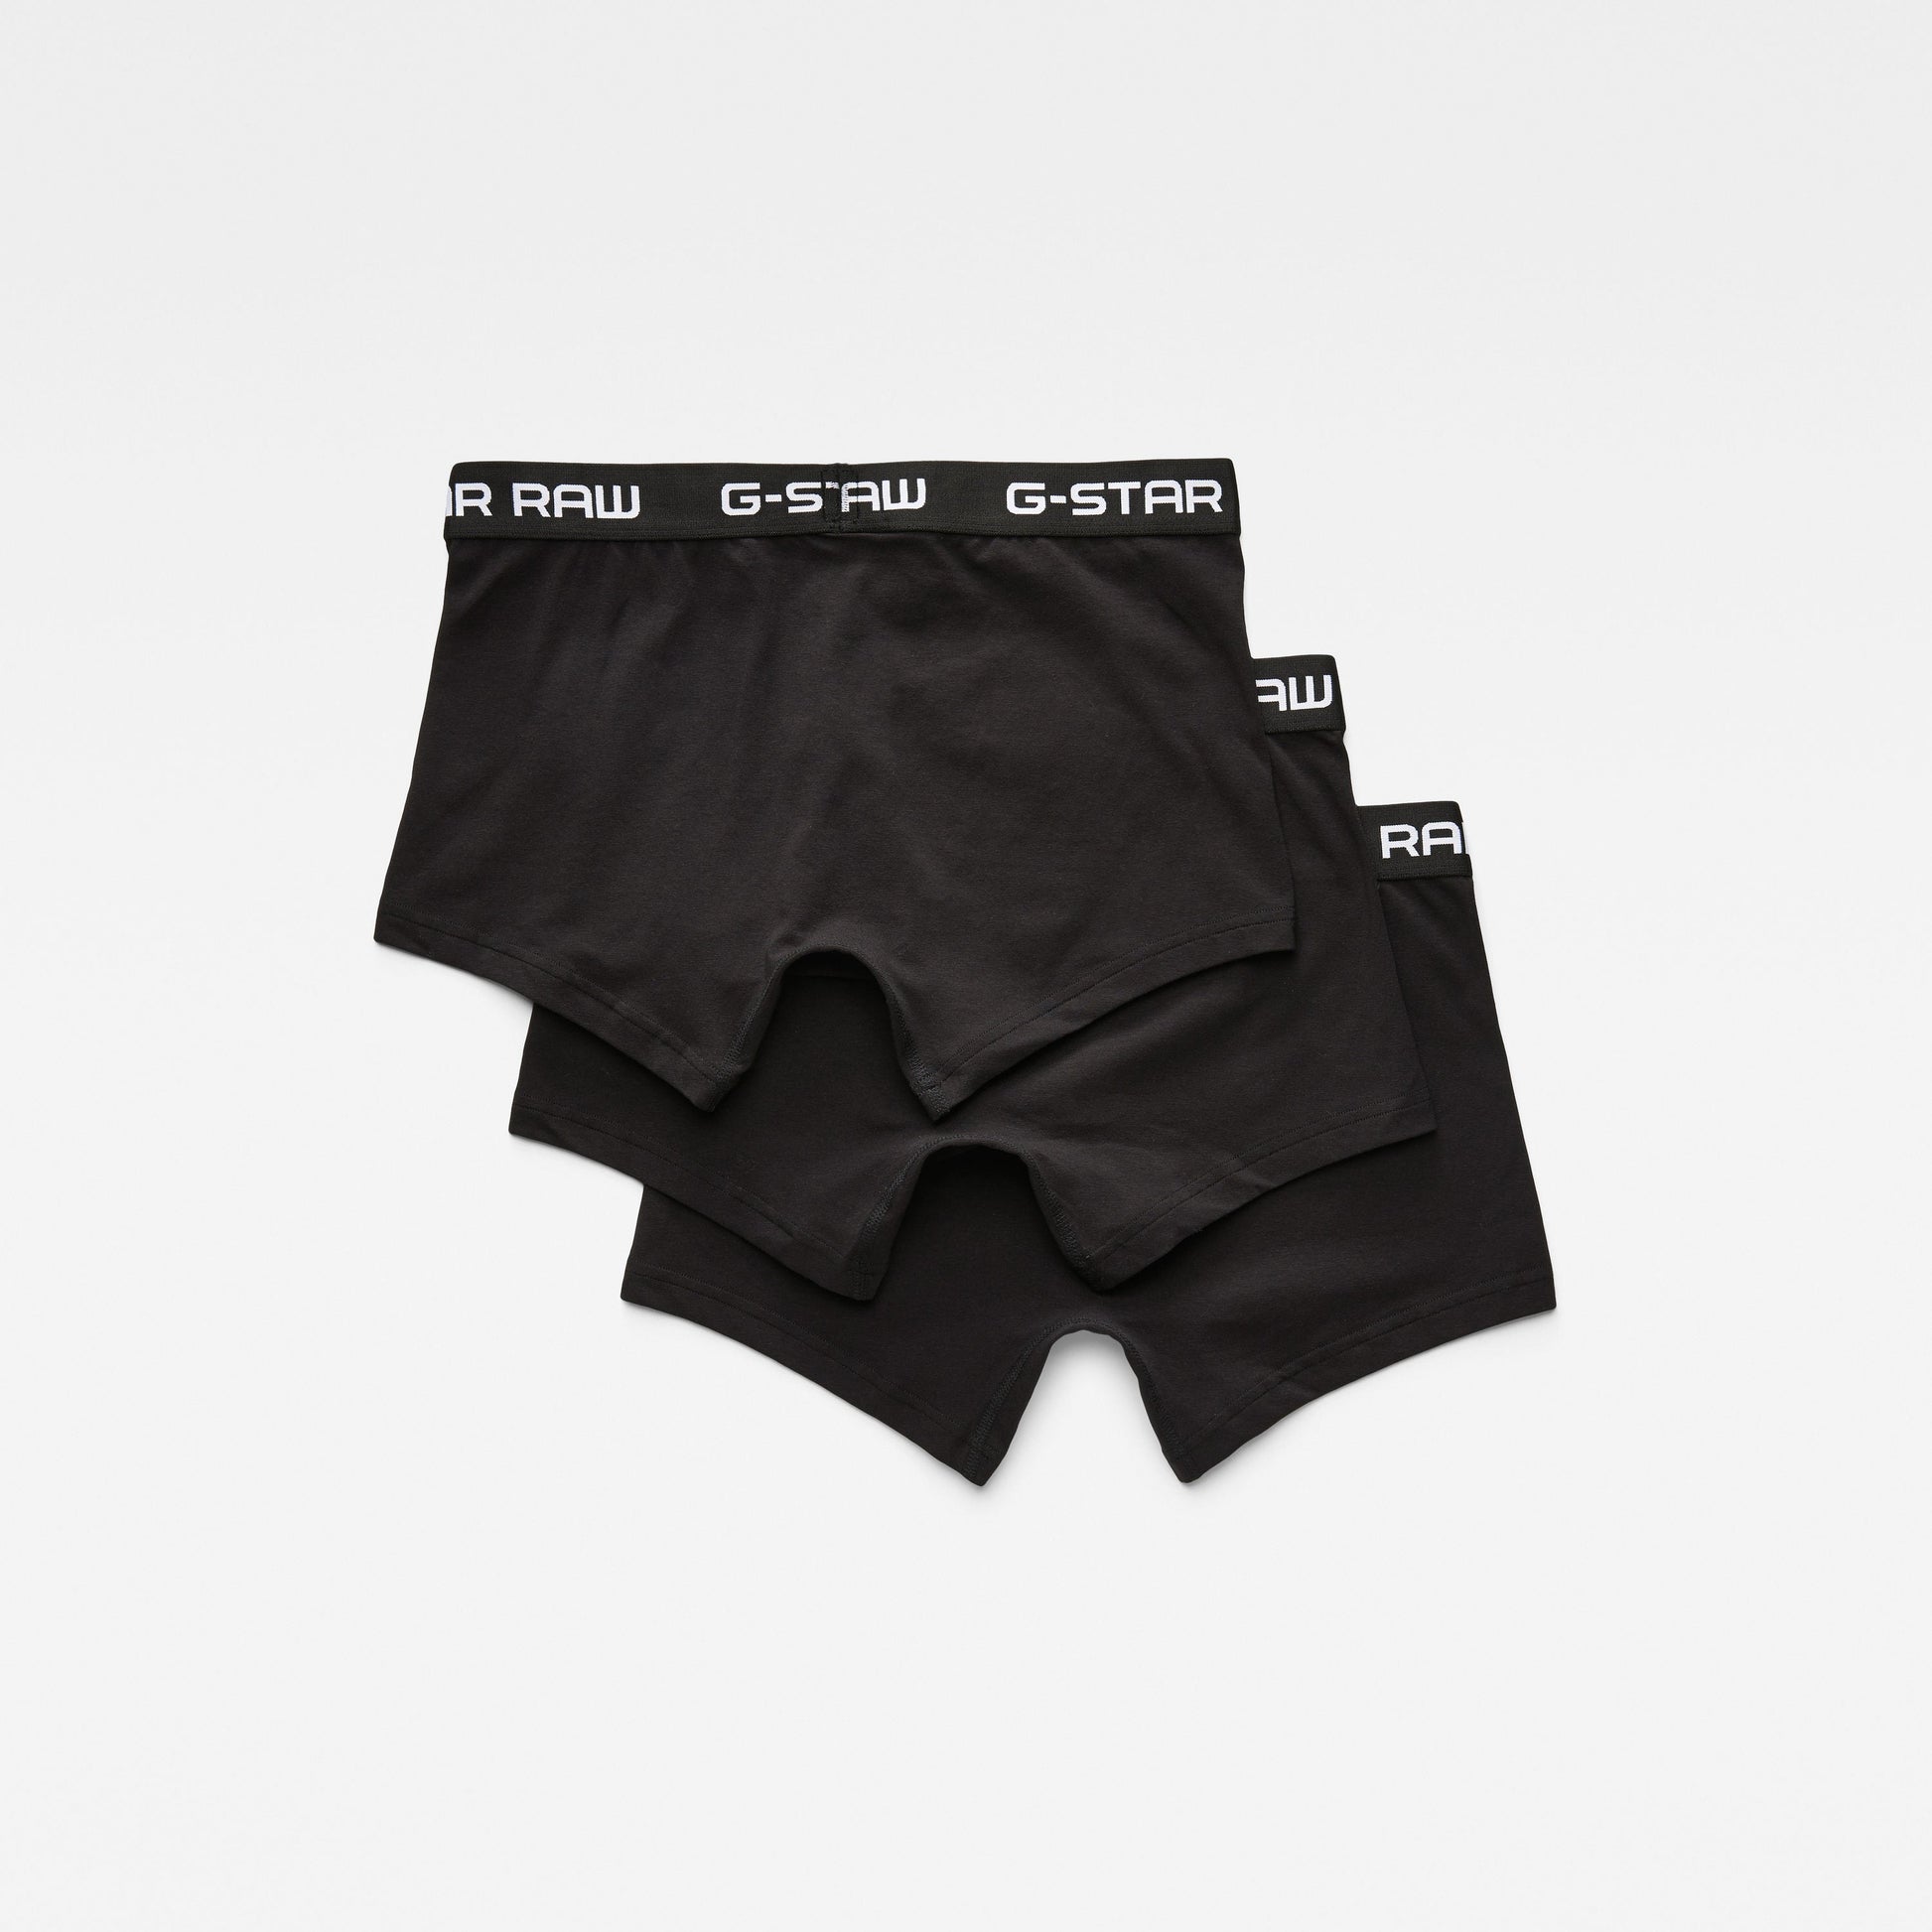 Classic Black Boxer Shorts (3 Pack) from G STAR Raw Ireland at Stylish Guy Men's Boutique